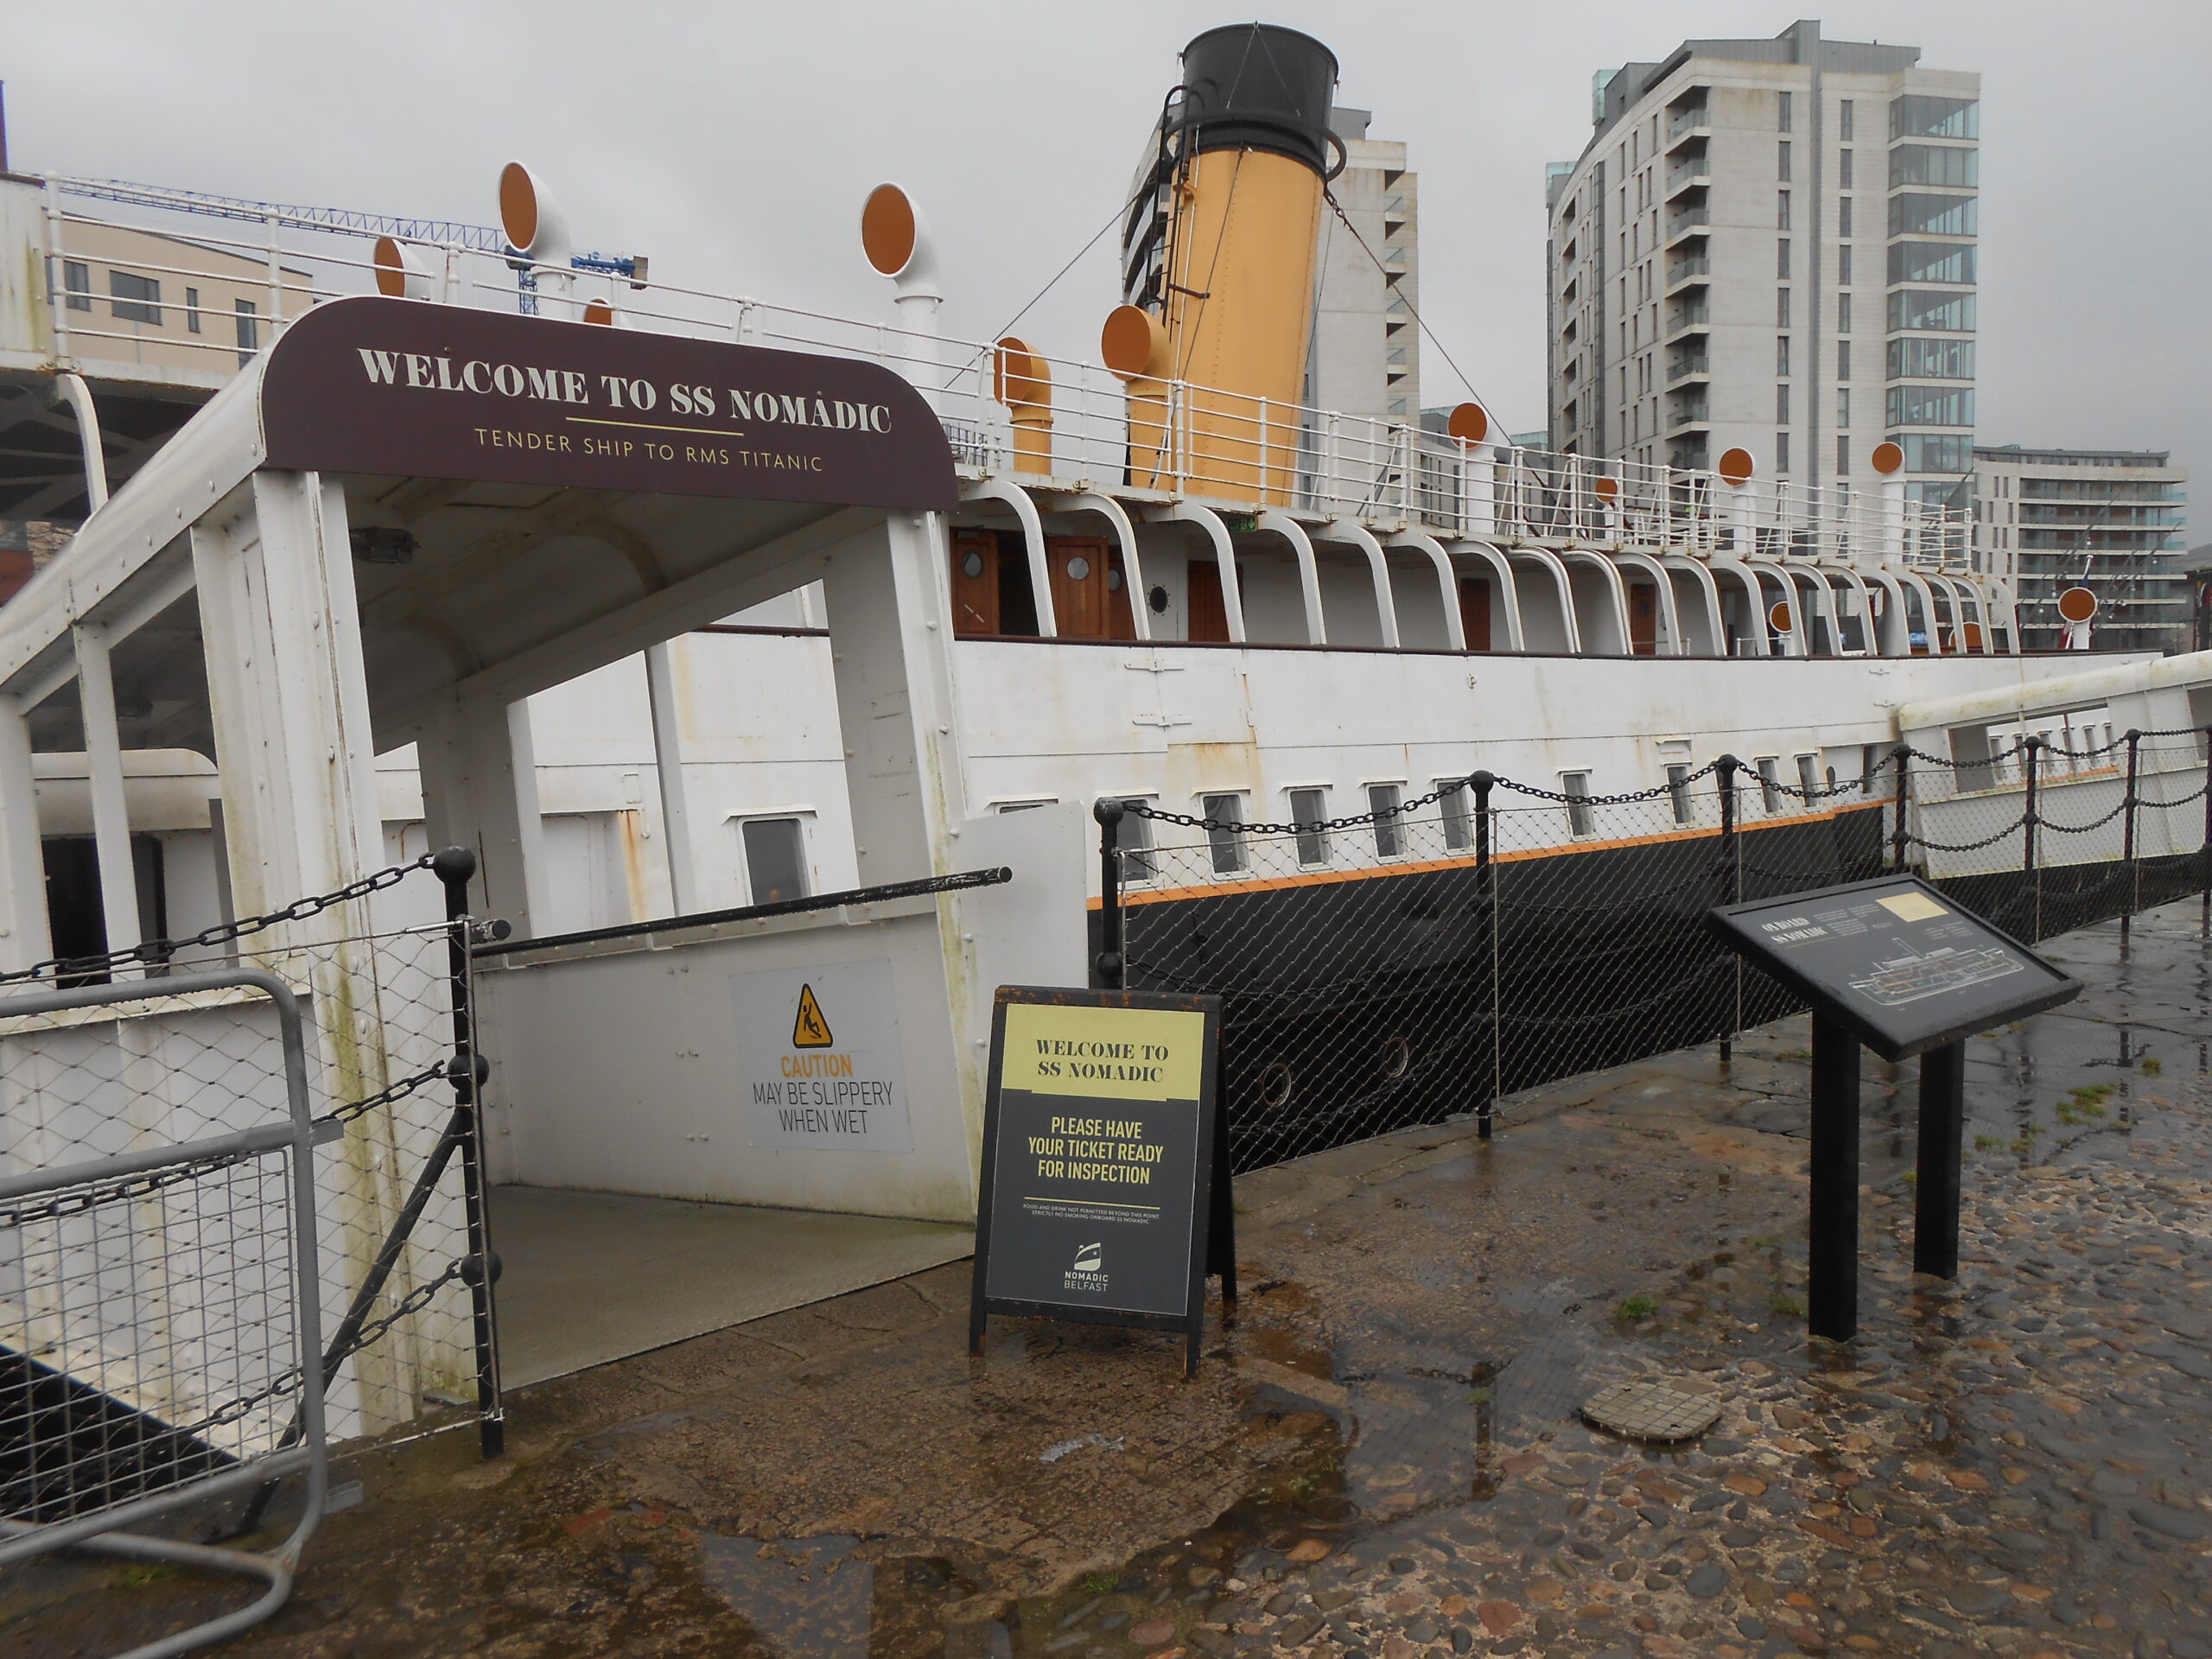 SS Nomadic, of the Titanic's family